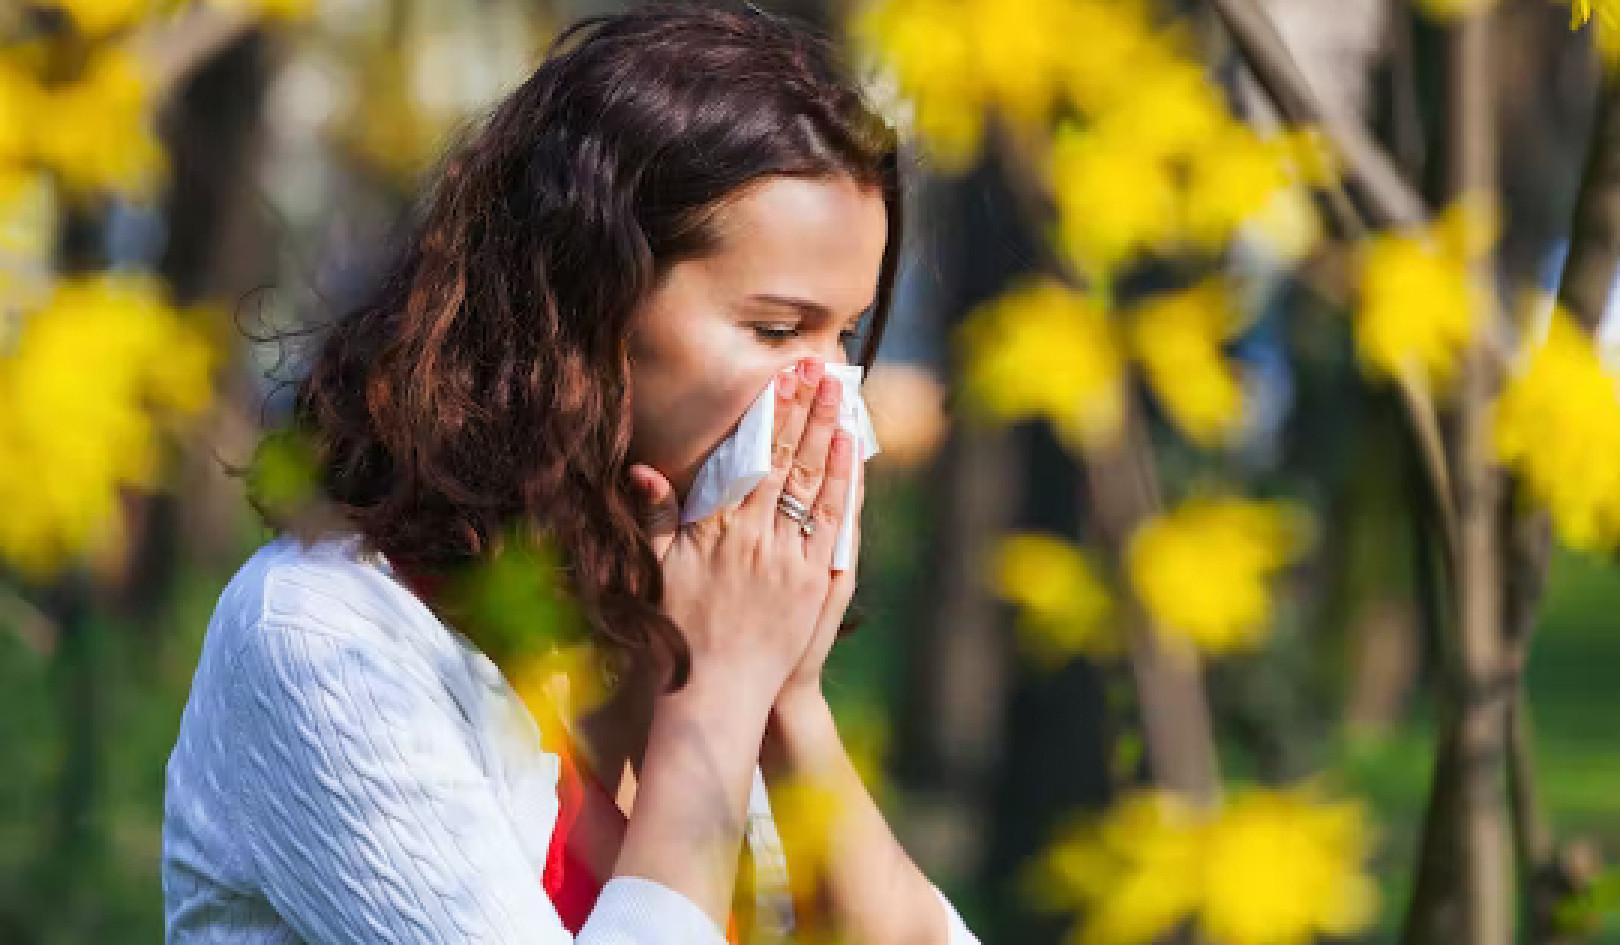 Here’s How To Tell If It's Covid or Hay Fever